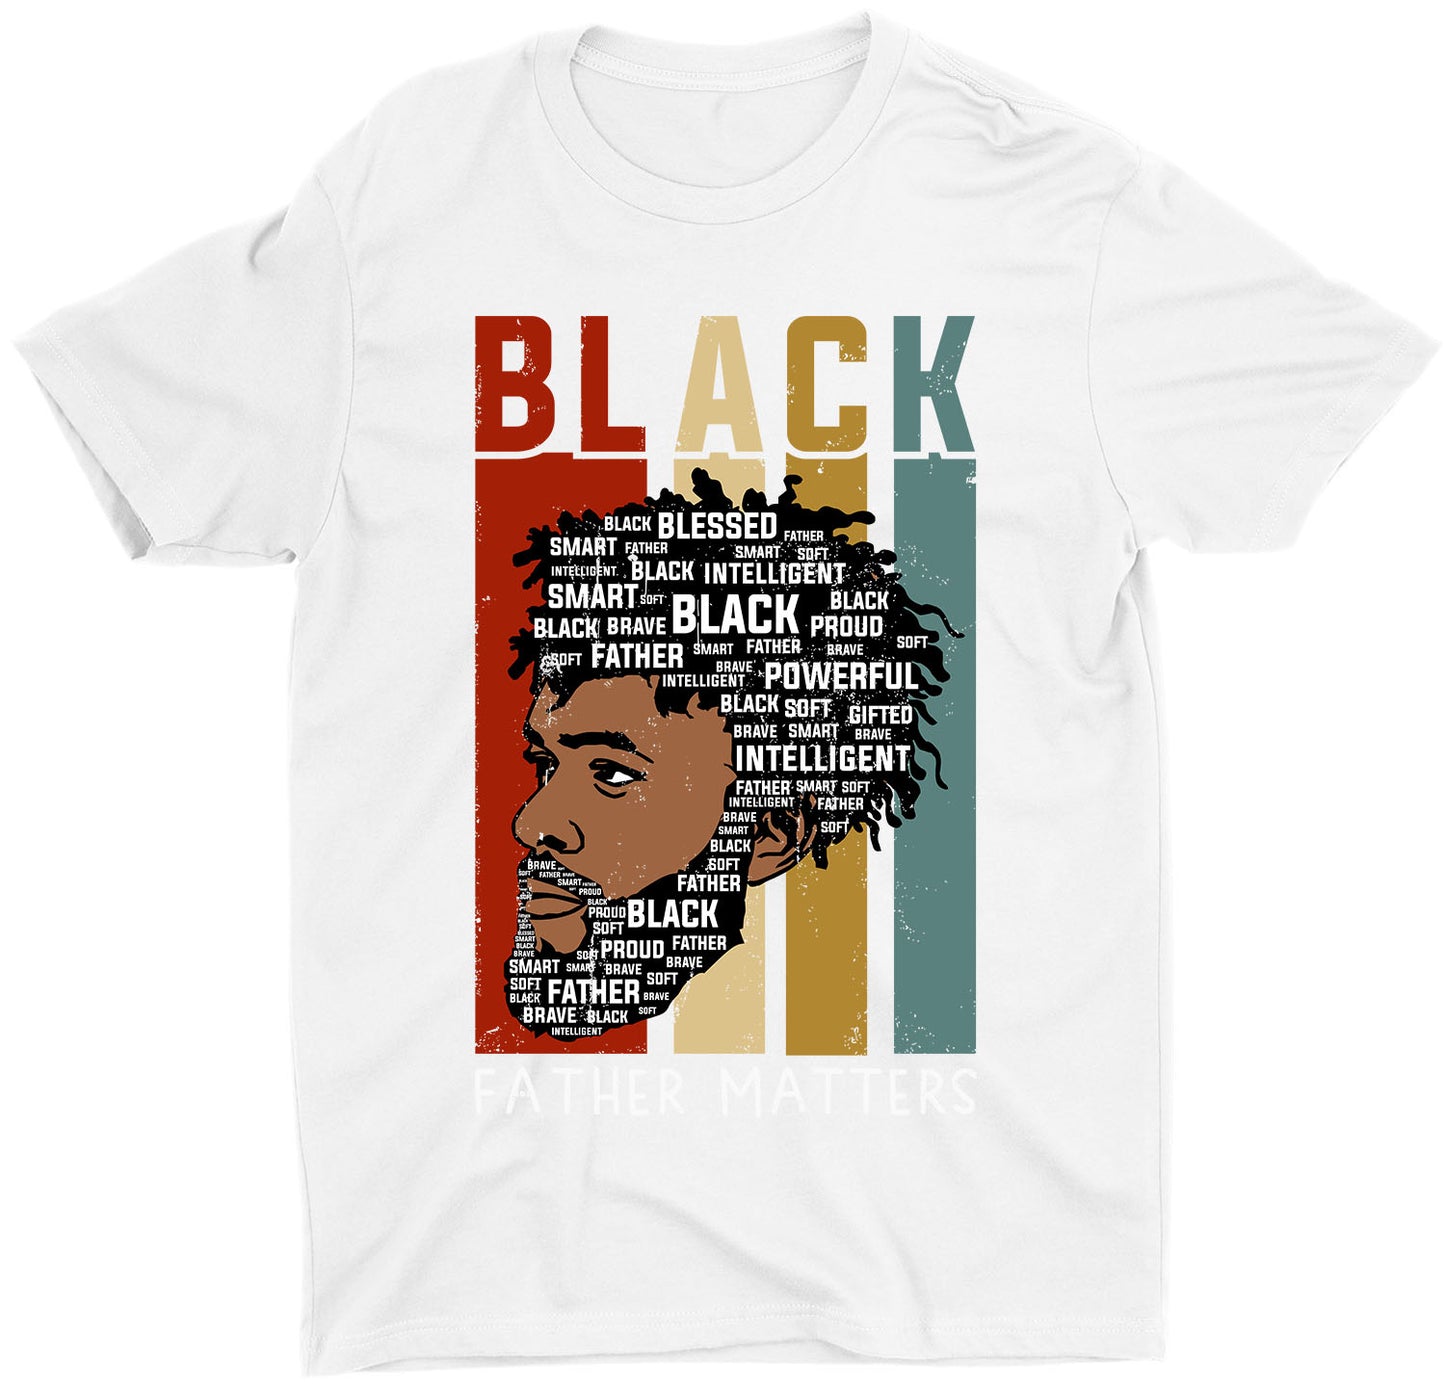 Black Father Matters Dads Rock Custom Short Sleeve Fathers Day T-Shirt